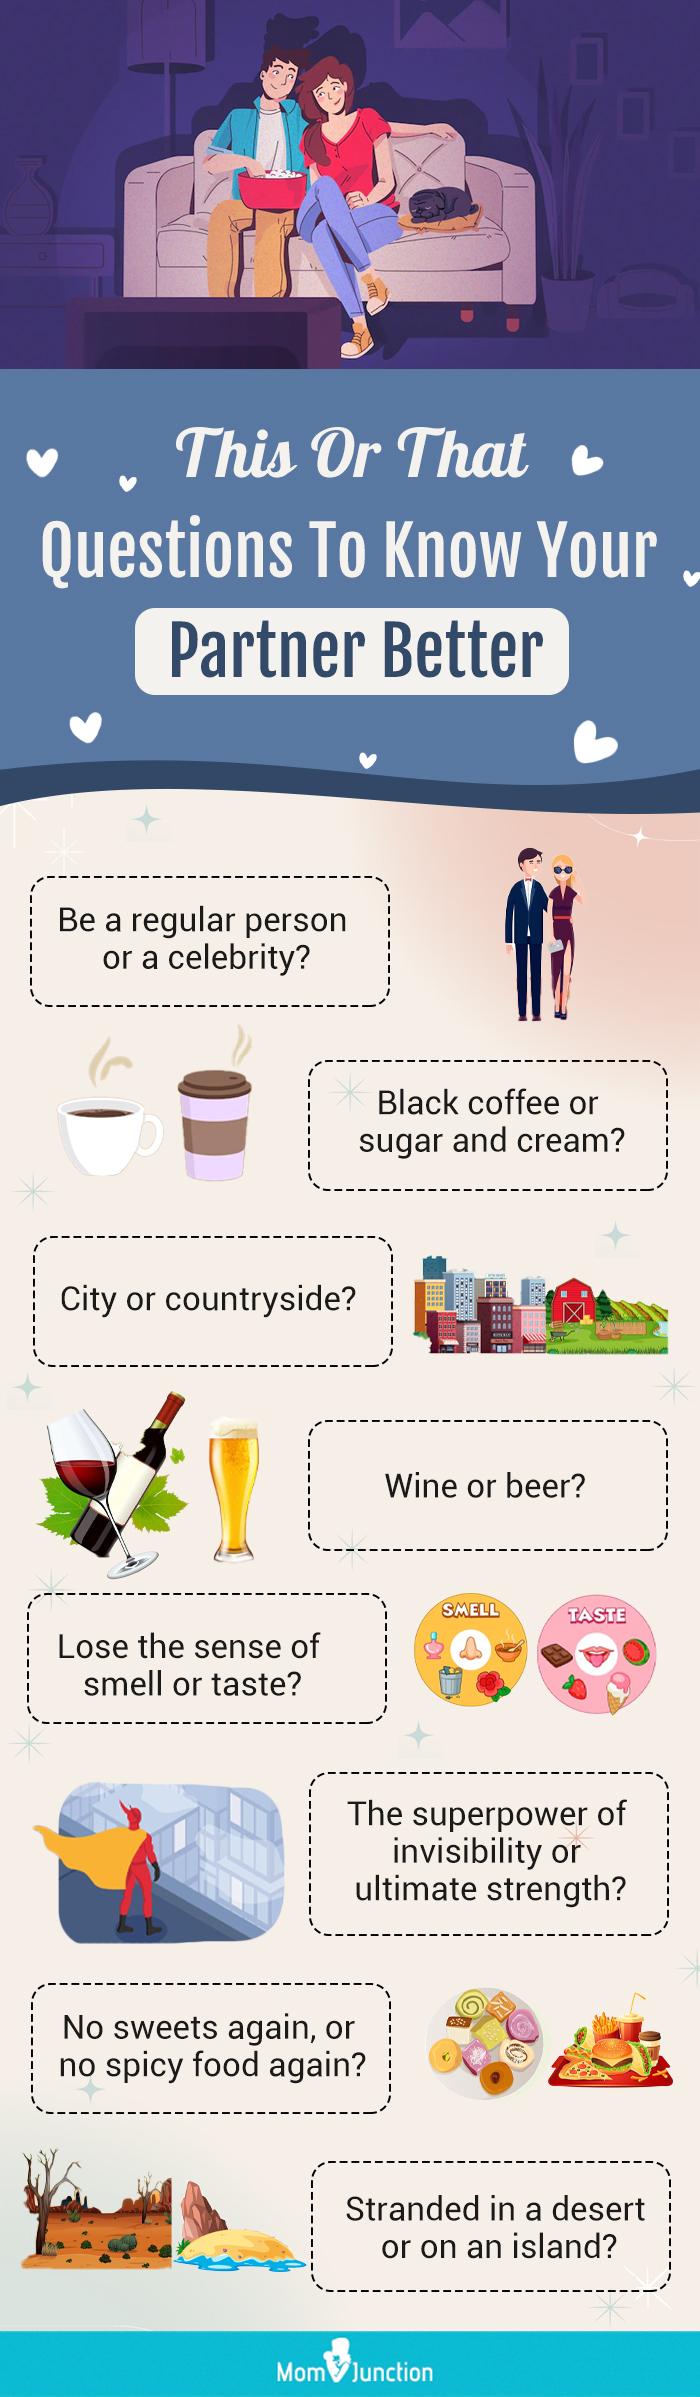 this or that questions to know your partner better [infographic]